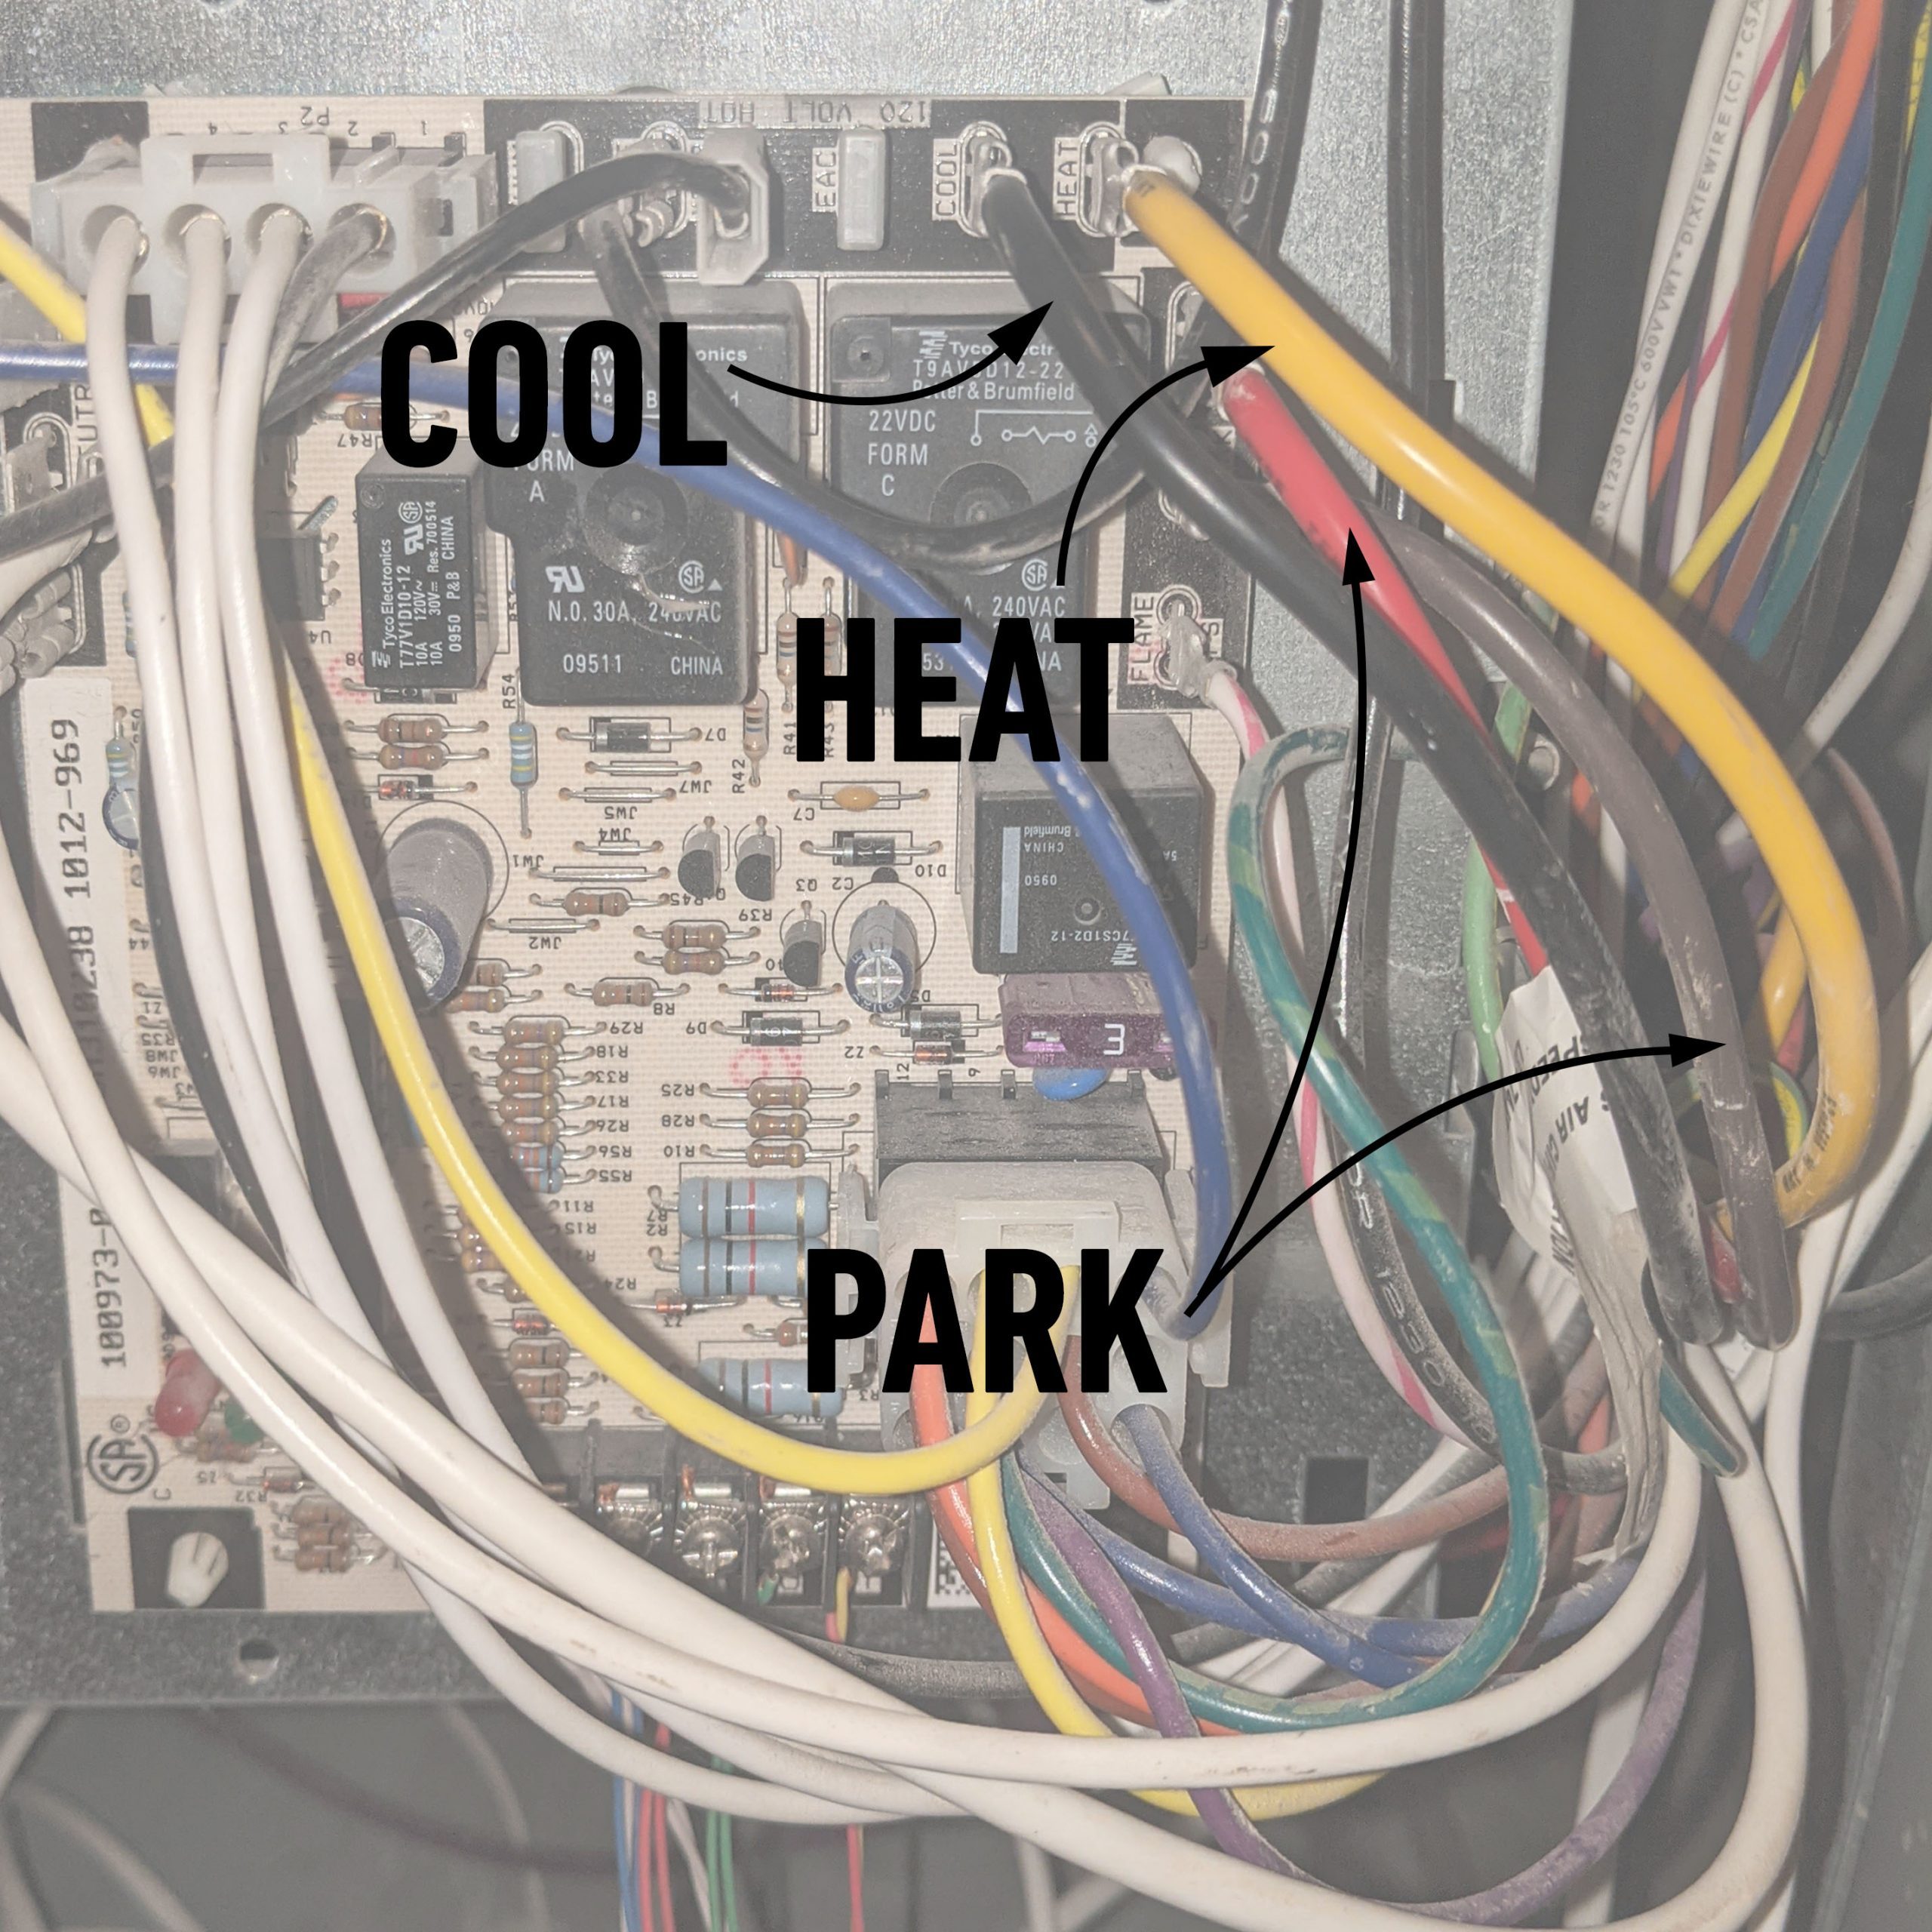 Furnace Wiring With Arrows To Indicate Cool Heat And Park